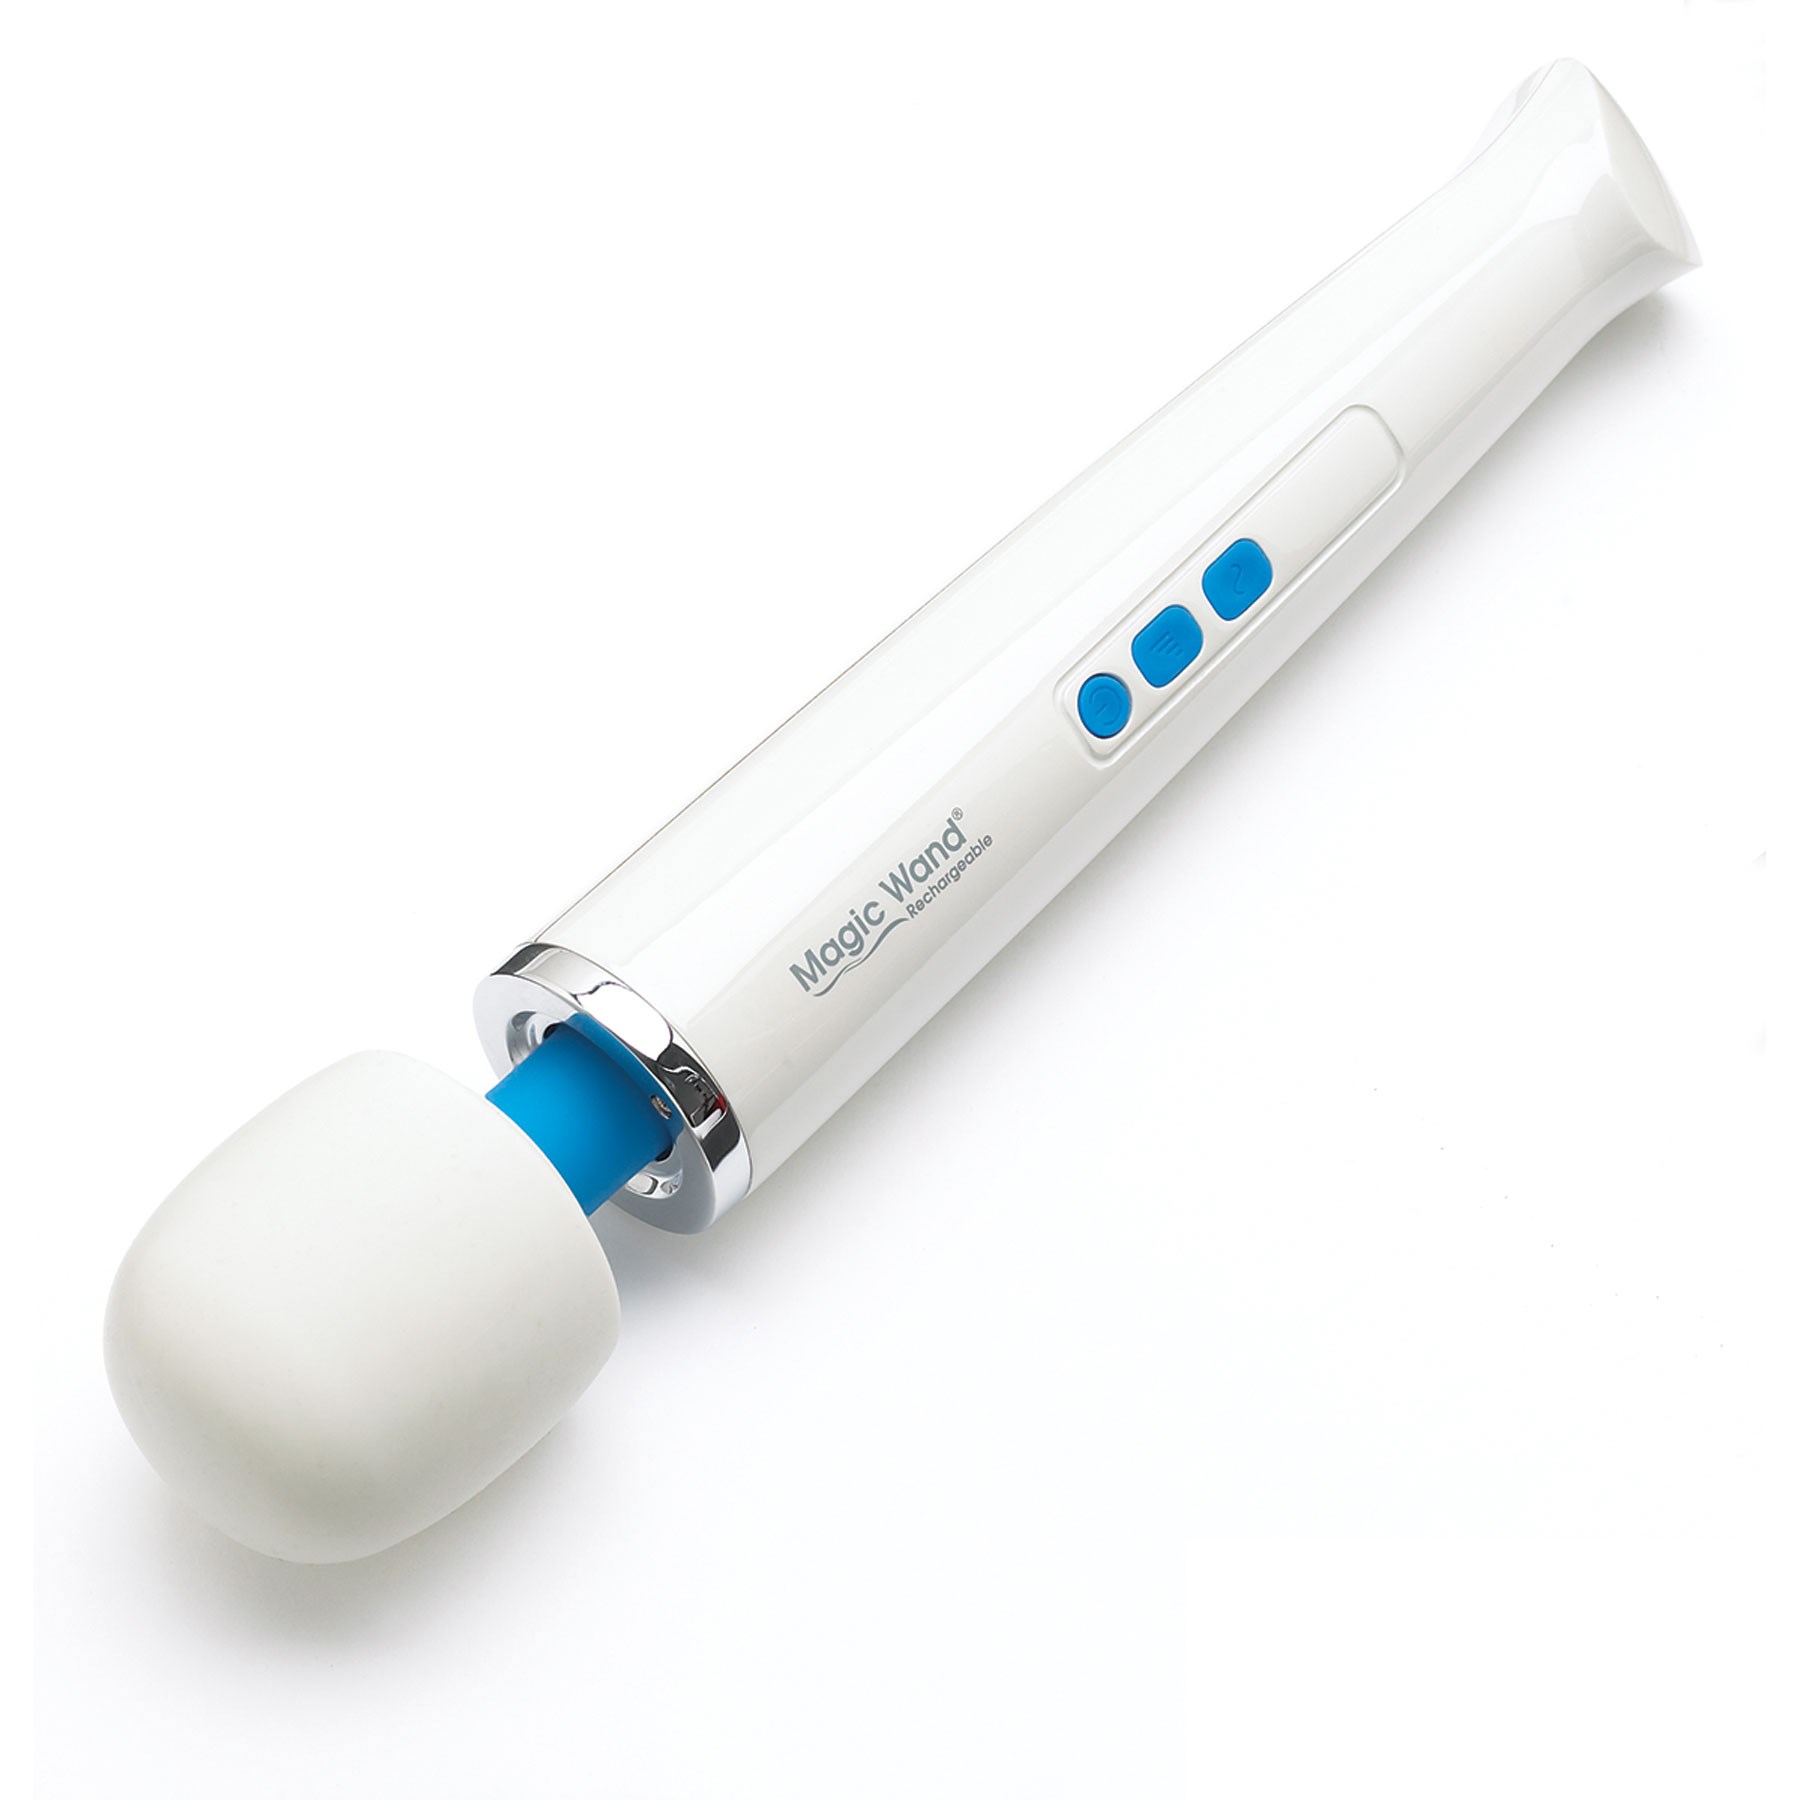 Vibratex Rechargeable Multi-Function Magic Wand